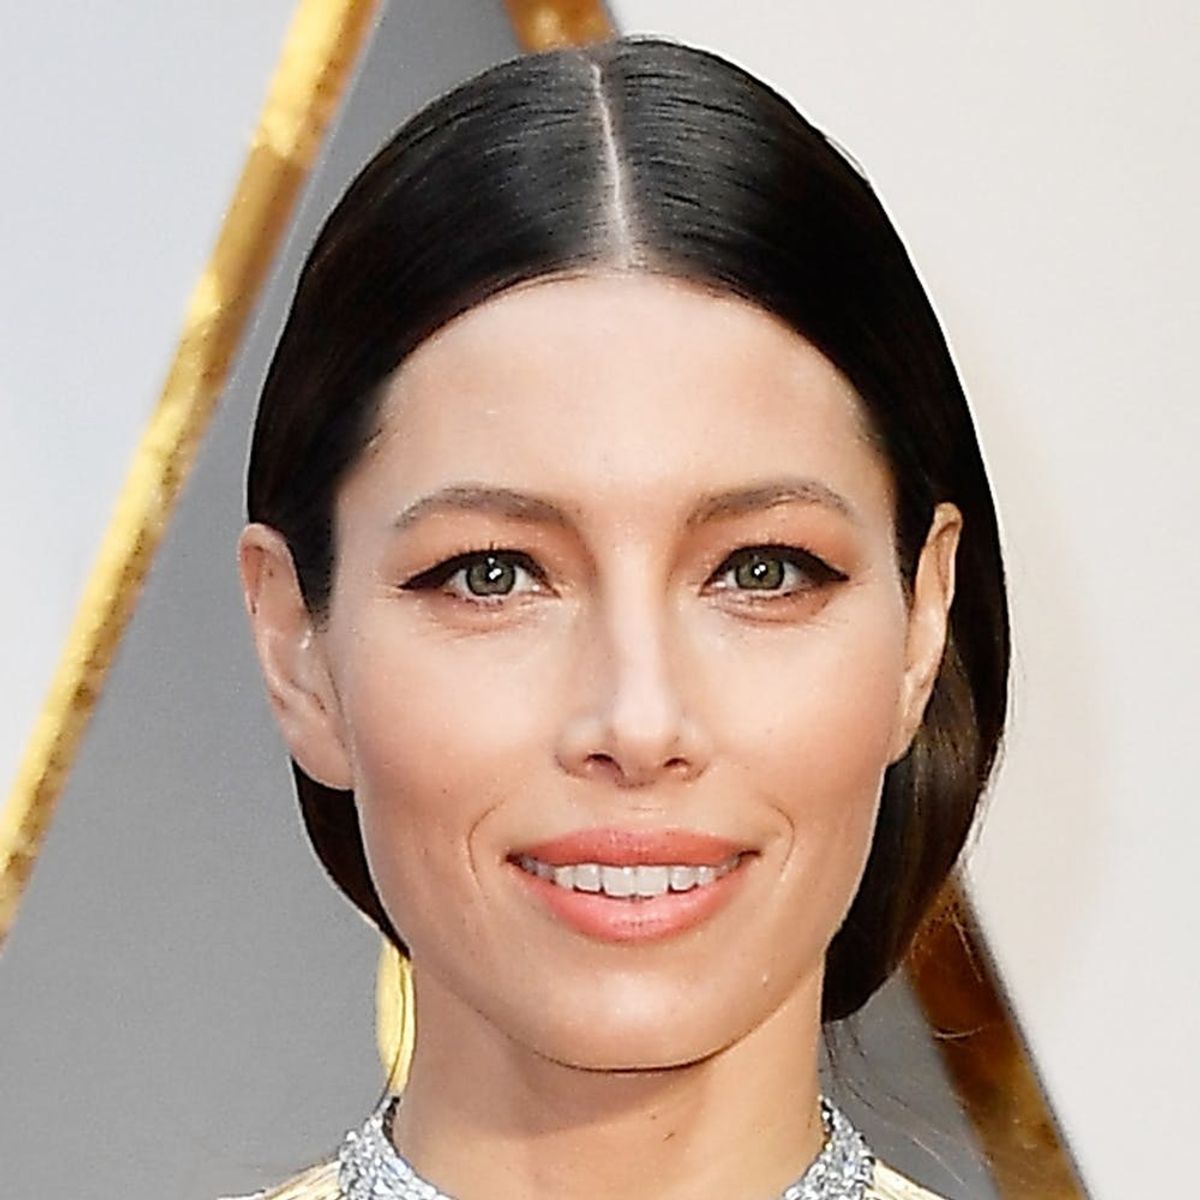 Jessica Biel Just Took It Back to the ‘80s With This Video Vixen-Worthy Hairstyle